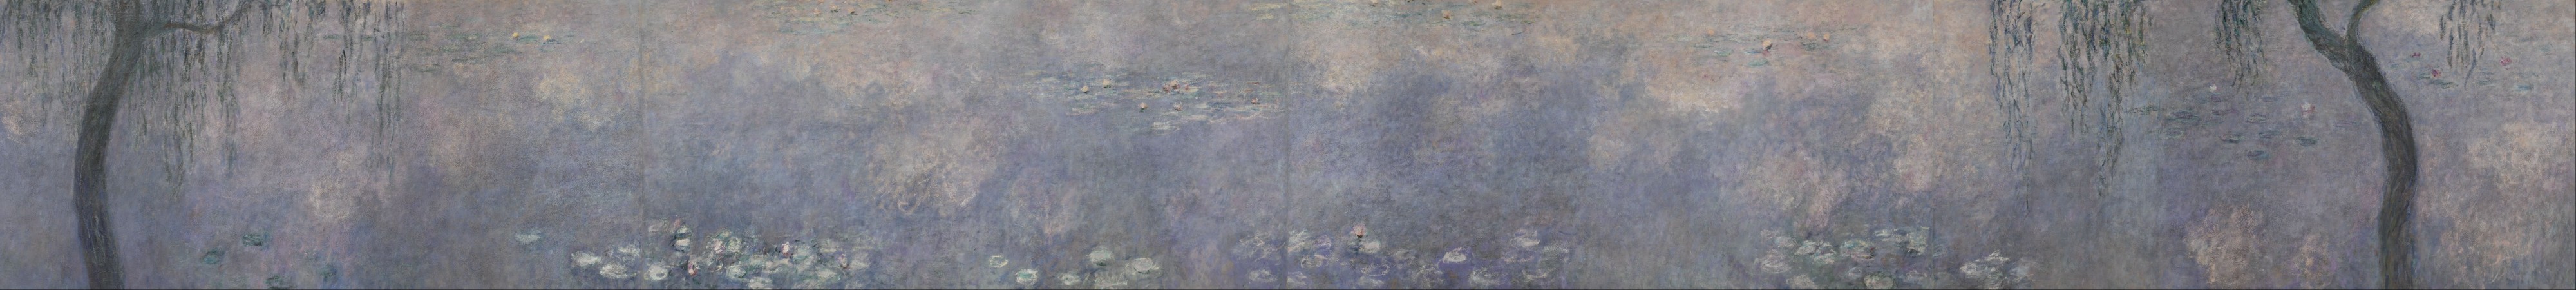 Claude Monet - The Water Lilies - The Two Willows - Google Art Project